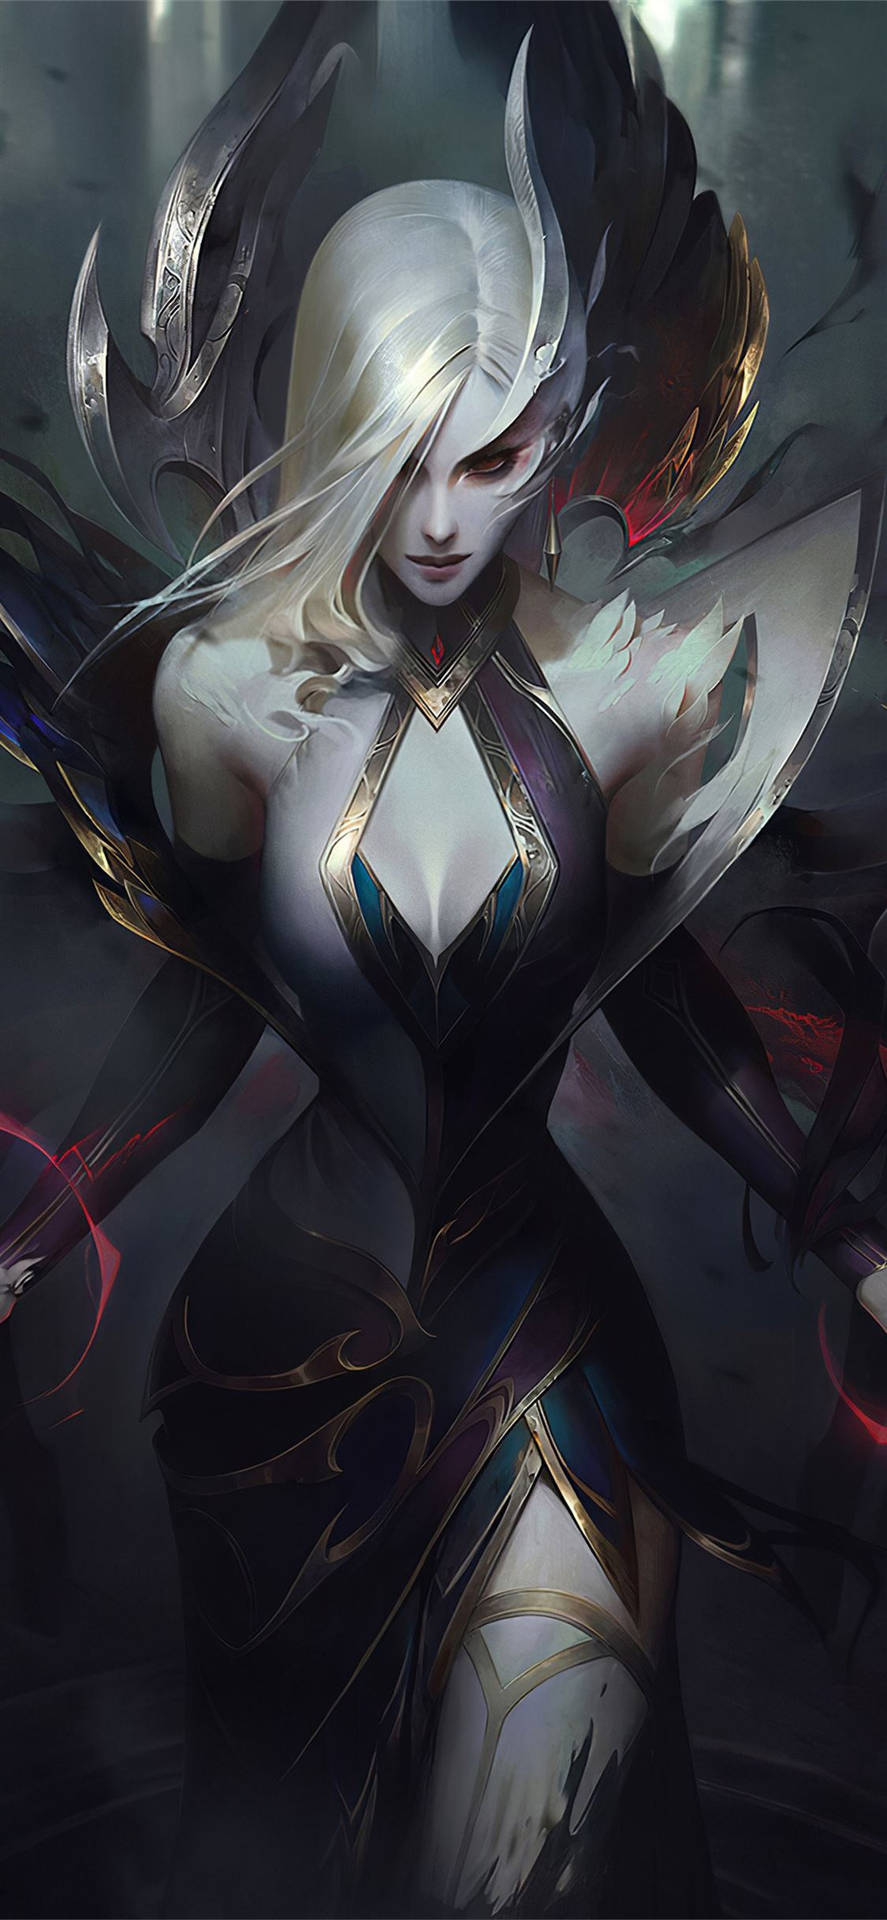 Thrilling Morgana from League of Legends theme for your iPhone Wallpaper